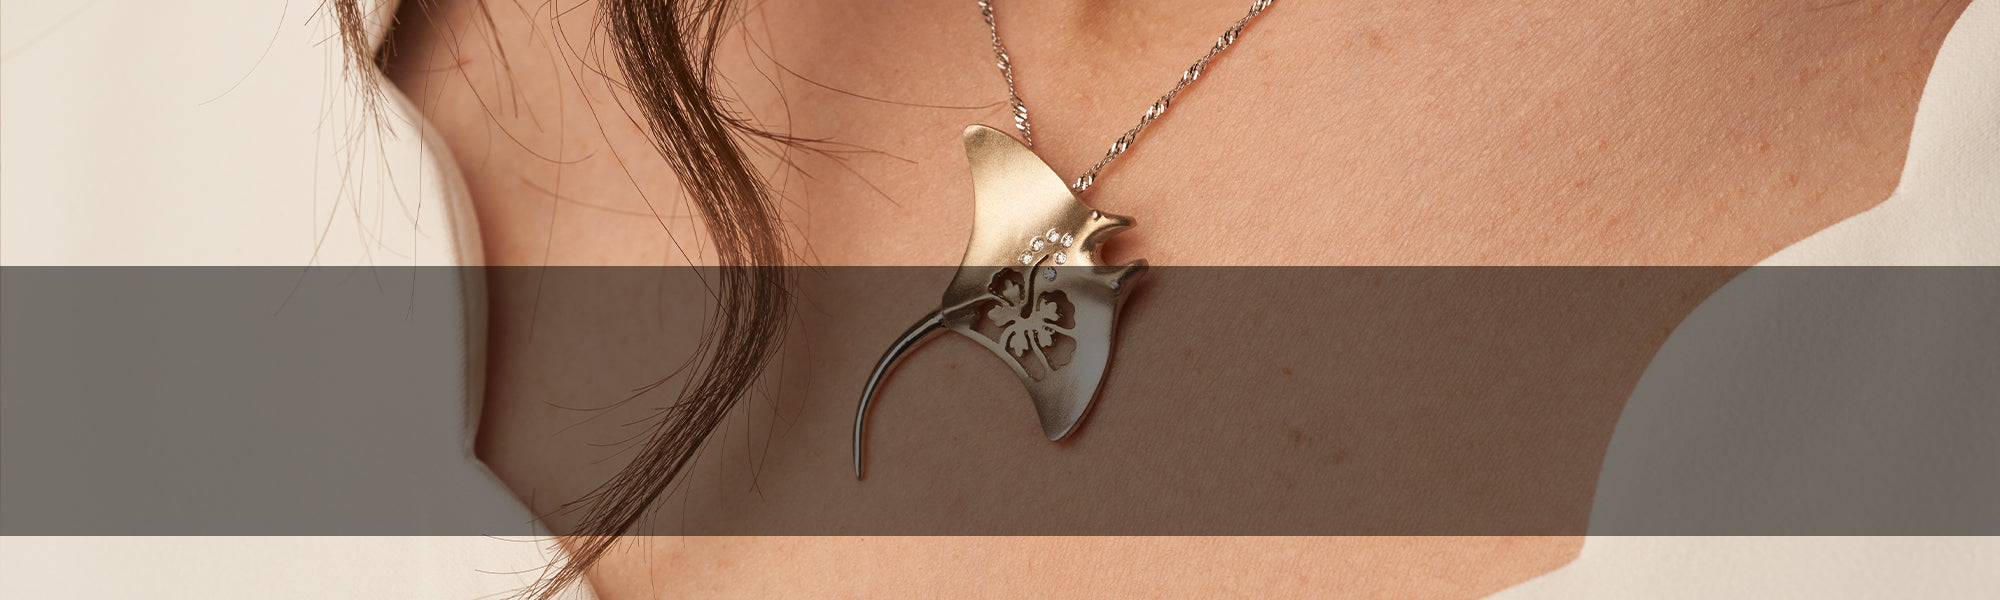 Woman Wearing Manta Ray Pendant by Park City Jewelers